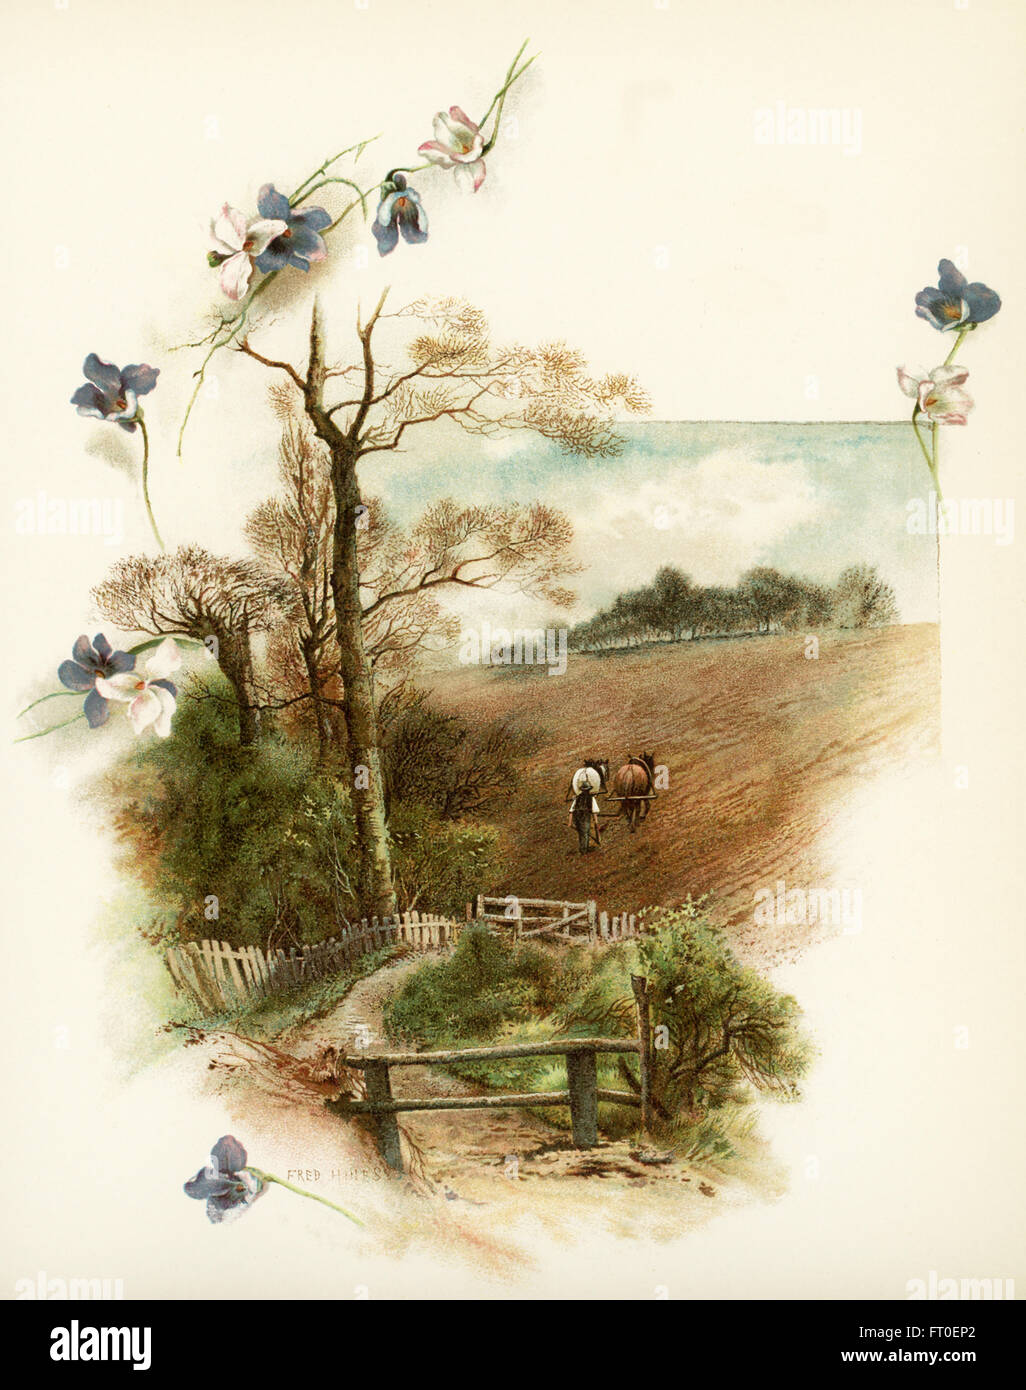 The caption for this illustration reads: For lo! The winter is past, the rain is over and gone. The scene shows a farmer with his horses plowing his field. There is a path leading to the field. This bucolic scene is a farming landscape. It accompanied Phillips Brooks’s Poems.  Brooks was an Episcopalian minister in Boston in the late 1800s. Stock Photo